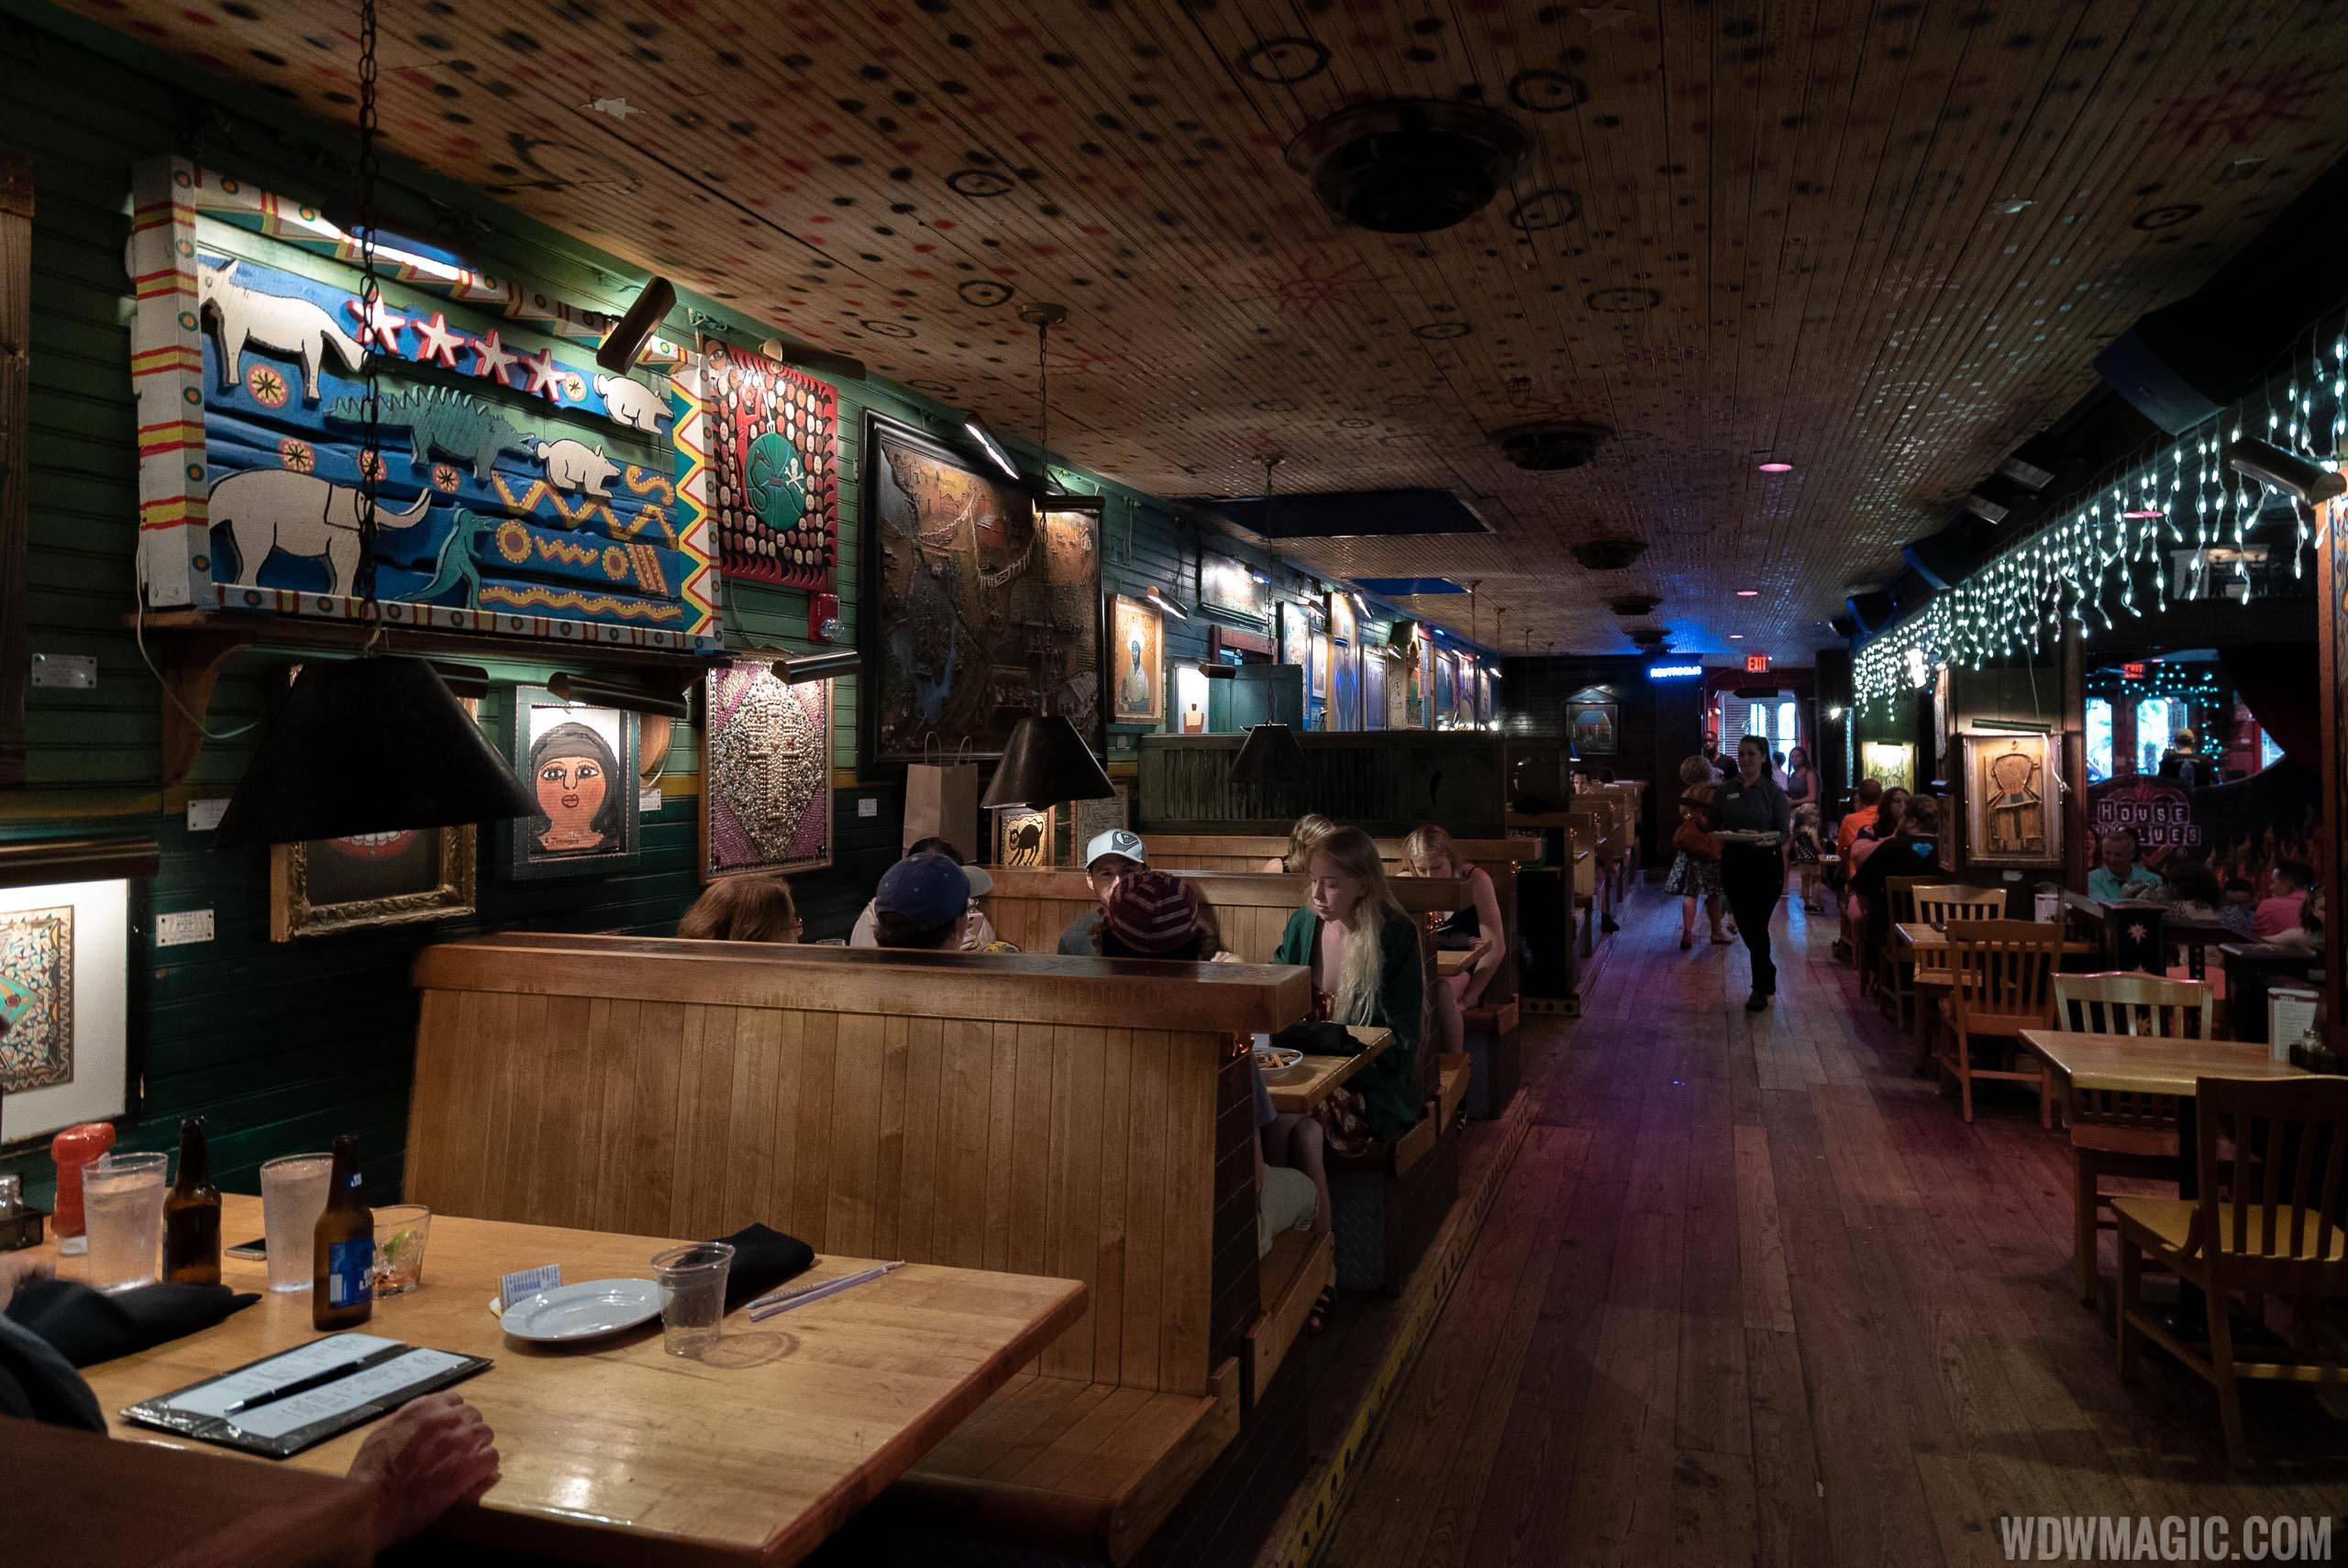 House of Blues adding new quick service dining option with a barbecue smokehouse